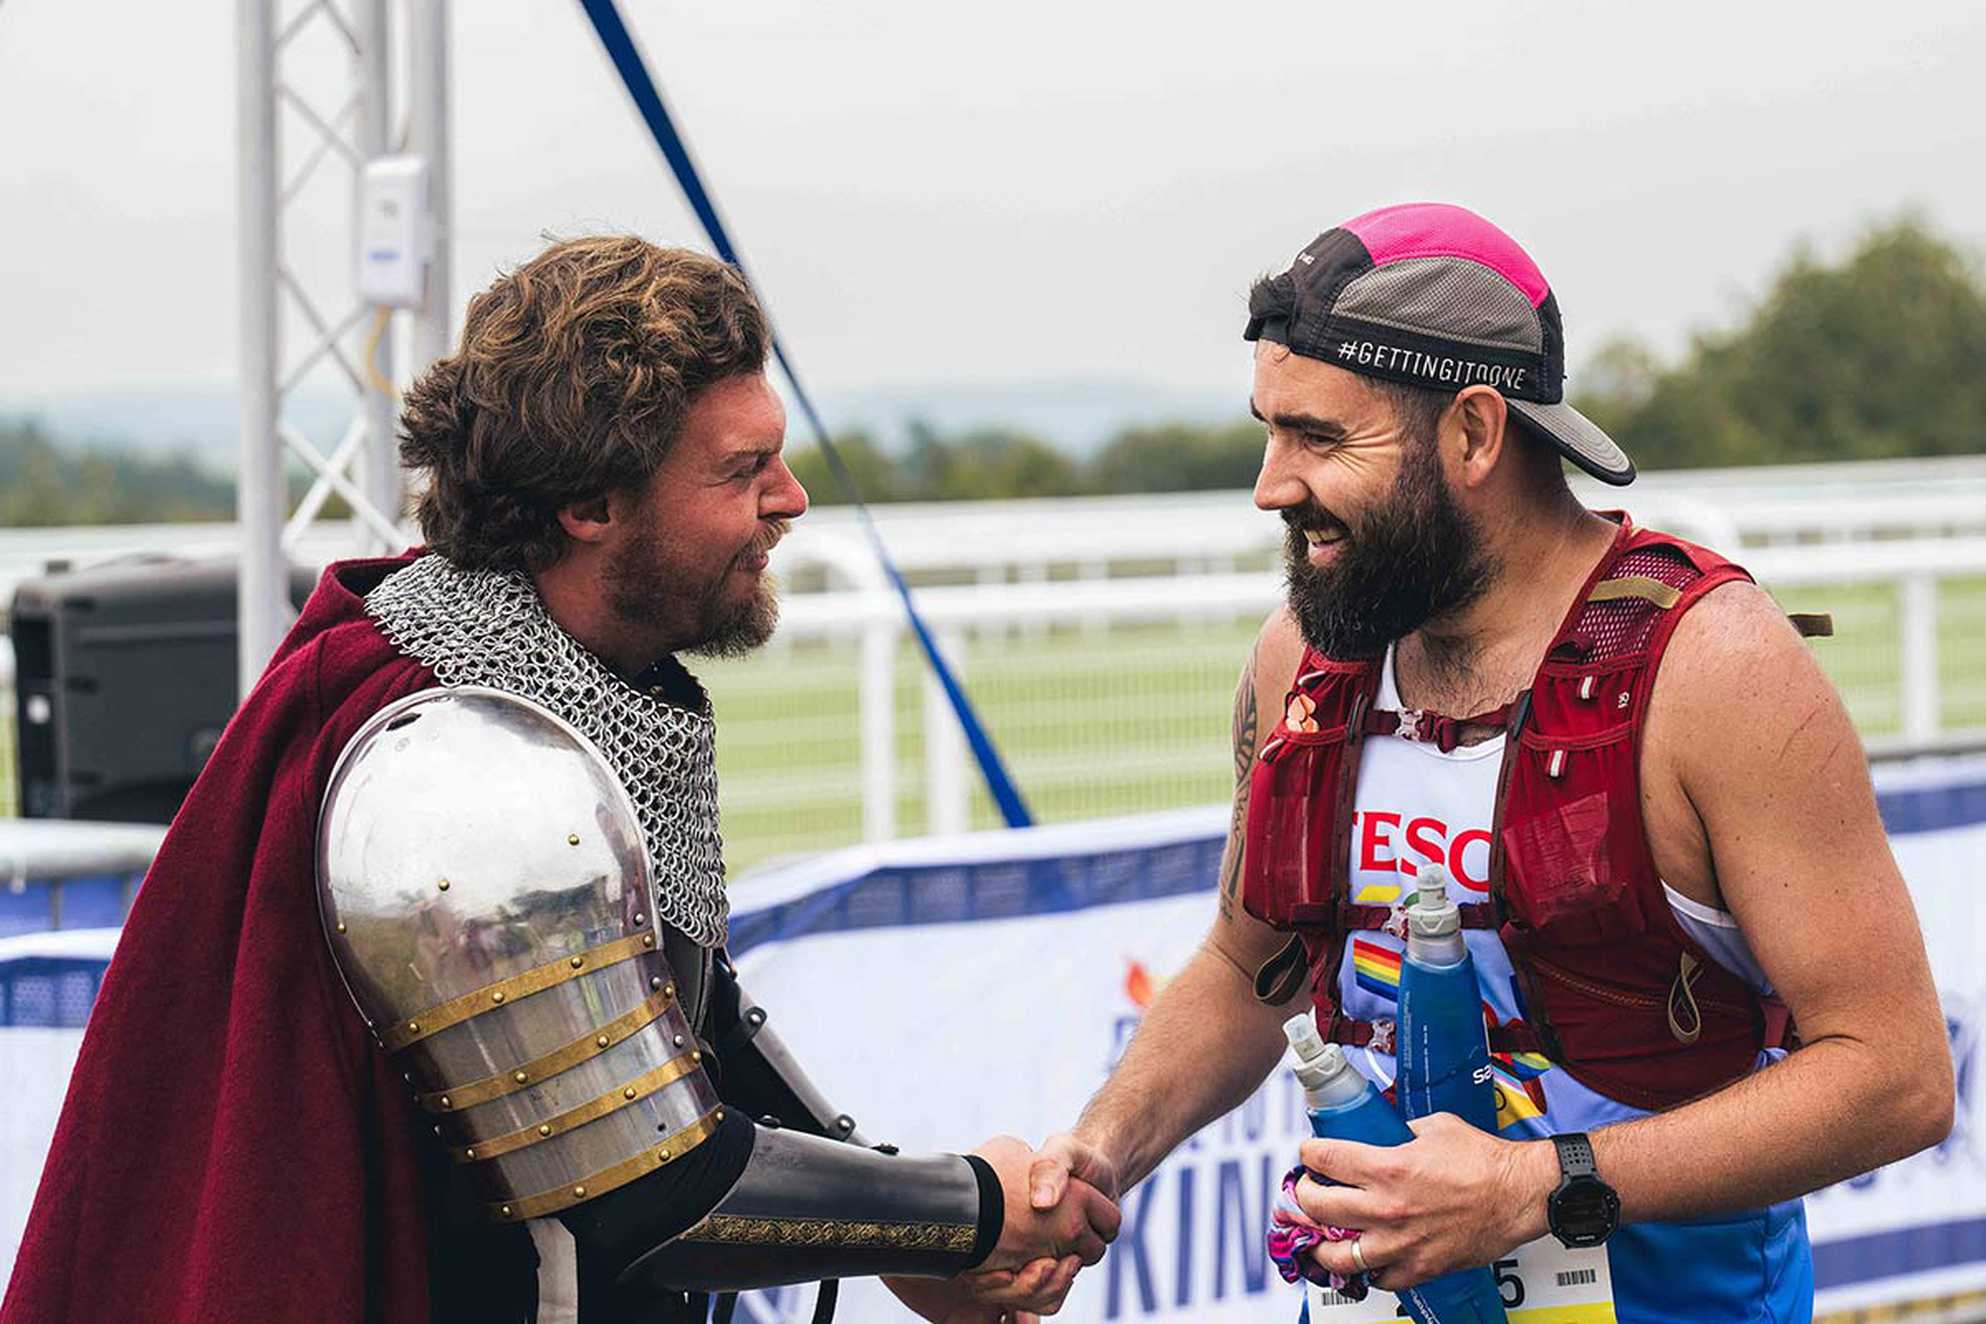 A participant shaking hands with a king after completing the race.